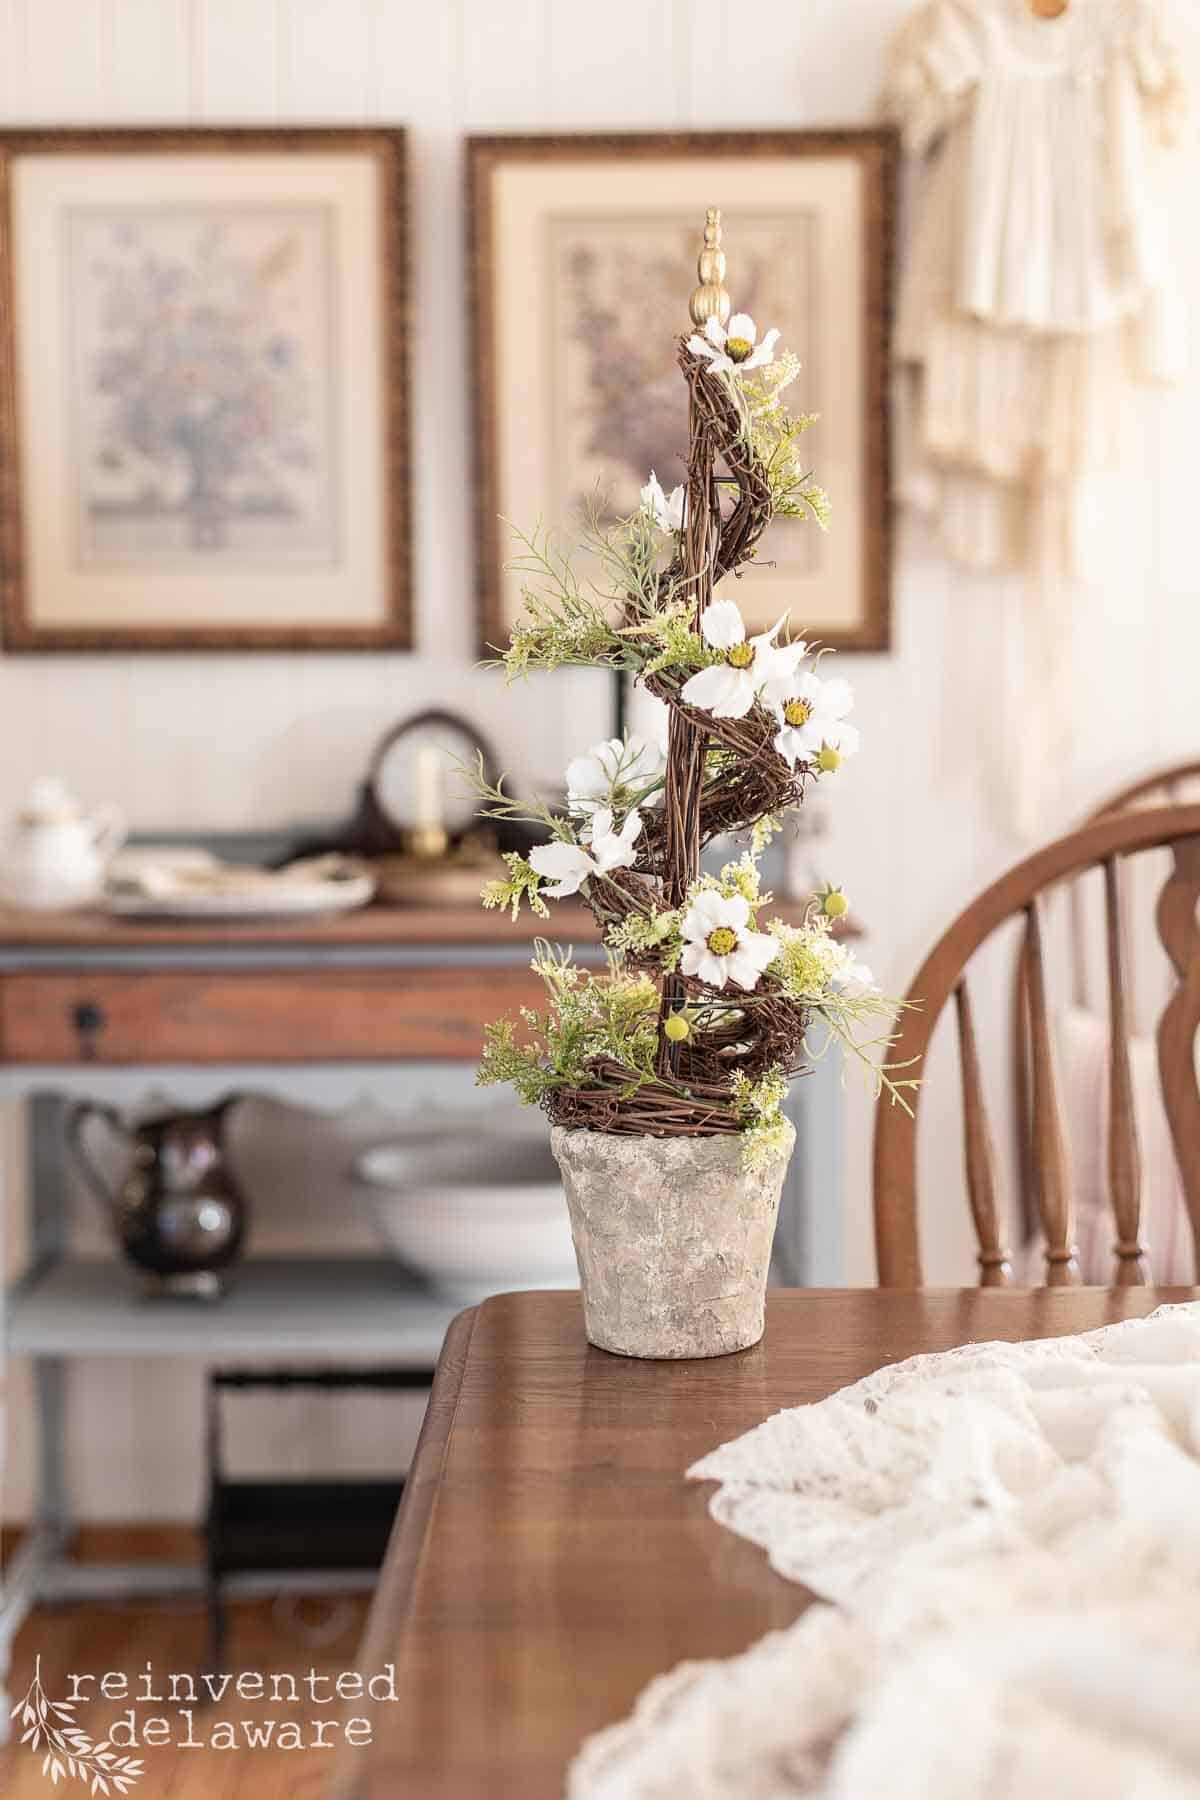 diy project - upcycled thrift store floral arrangement